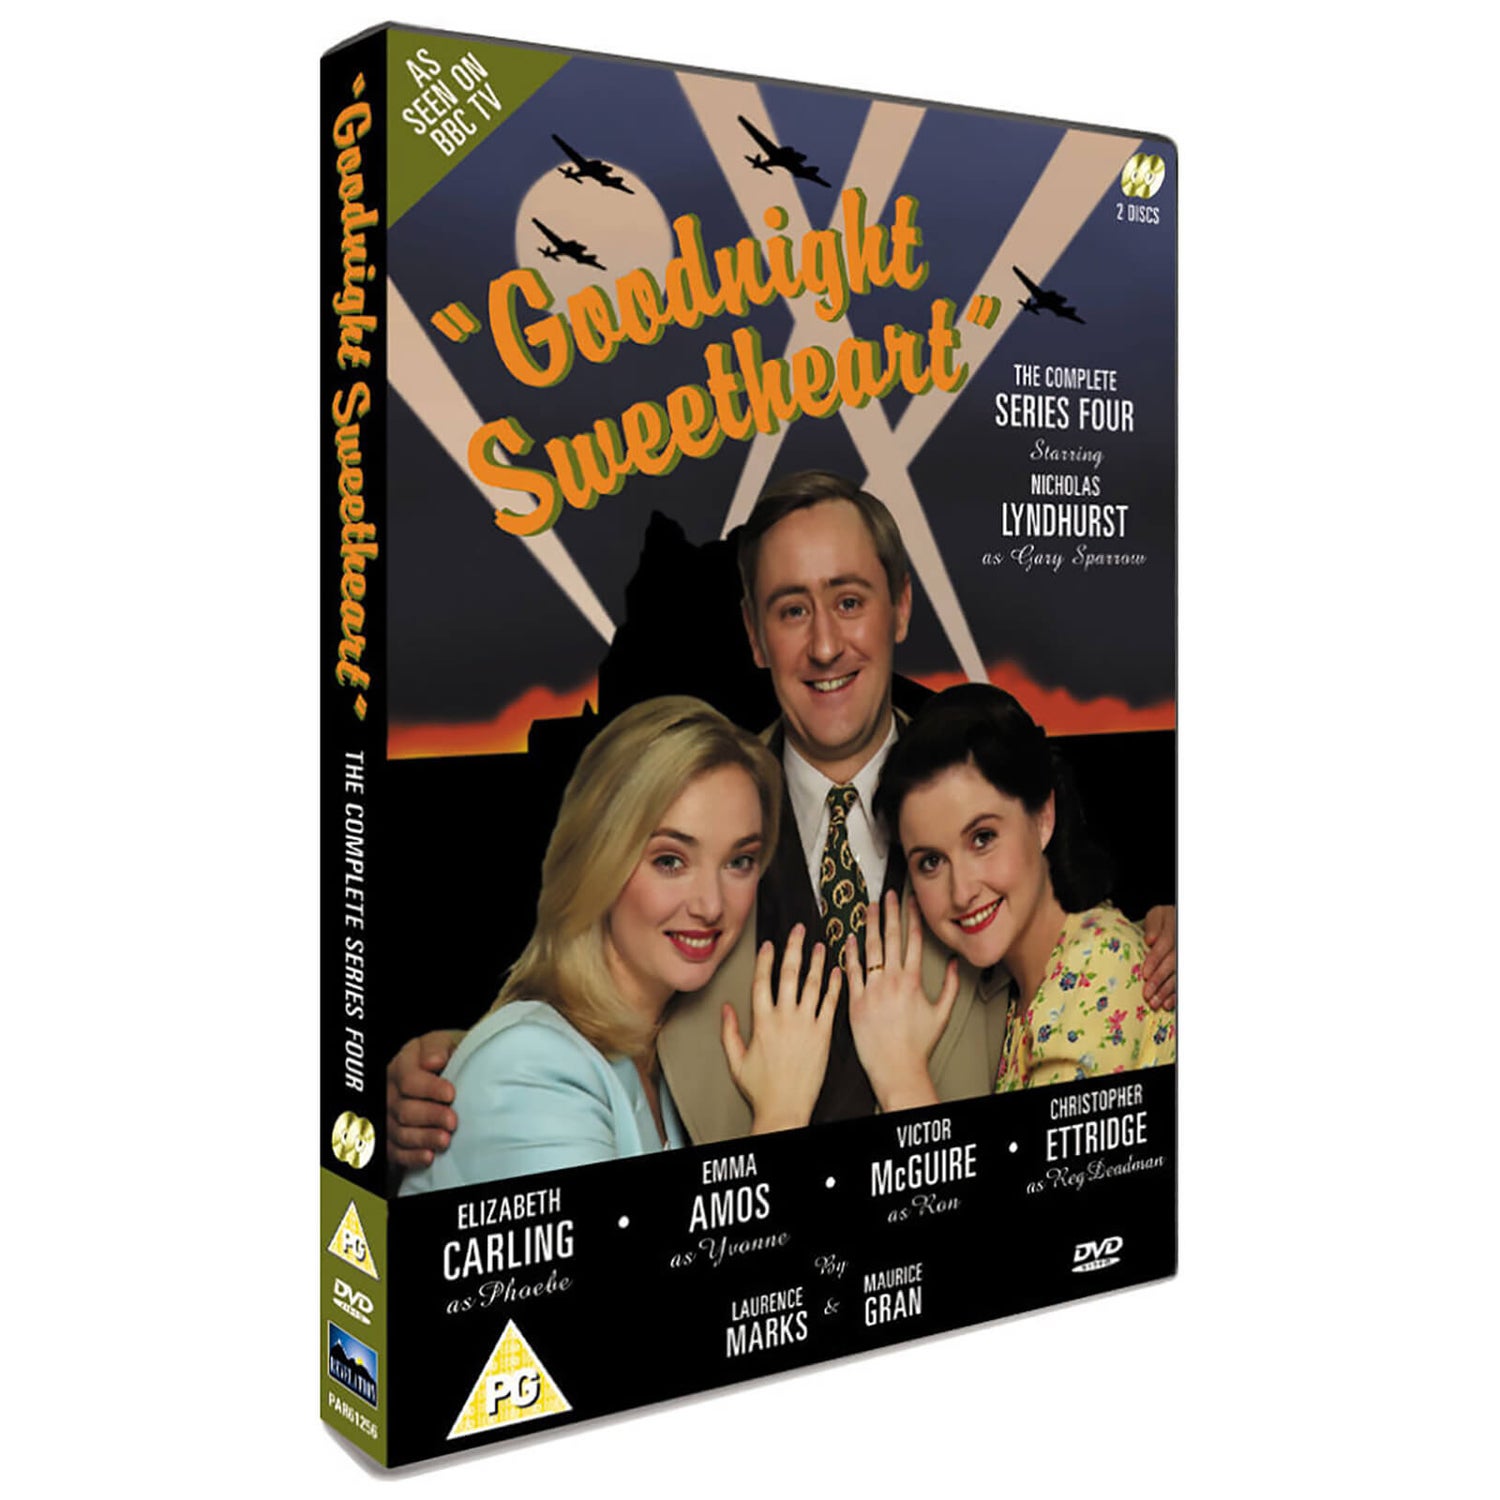 Goodnight Sweetheart - The Complete Series 4